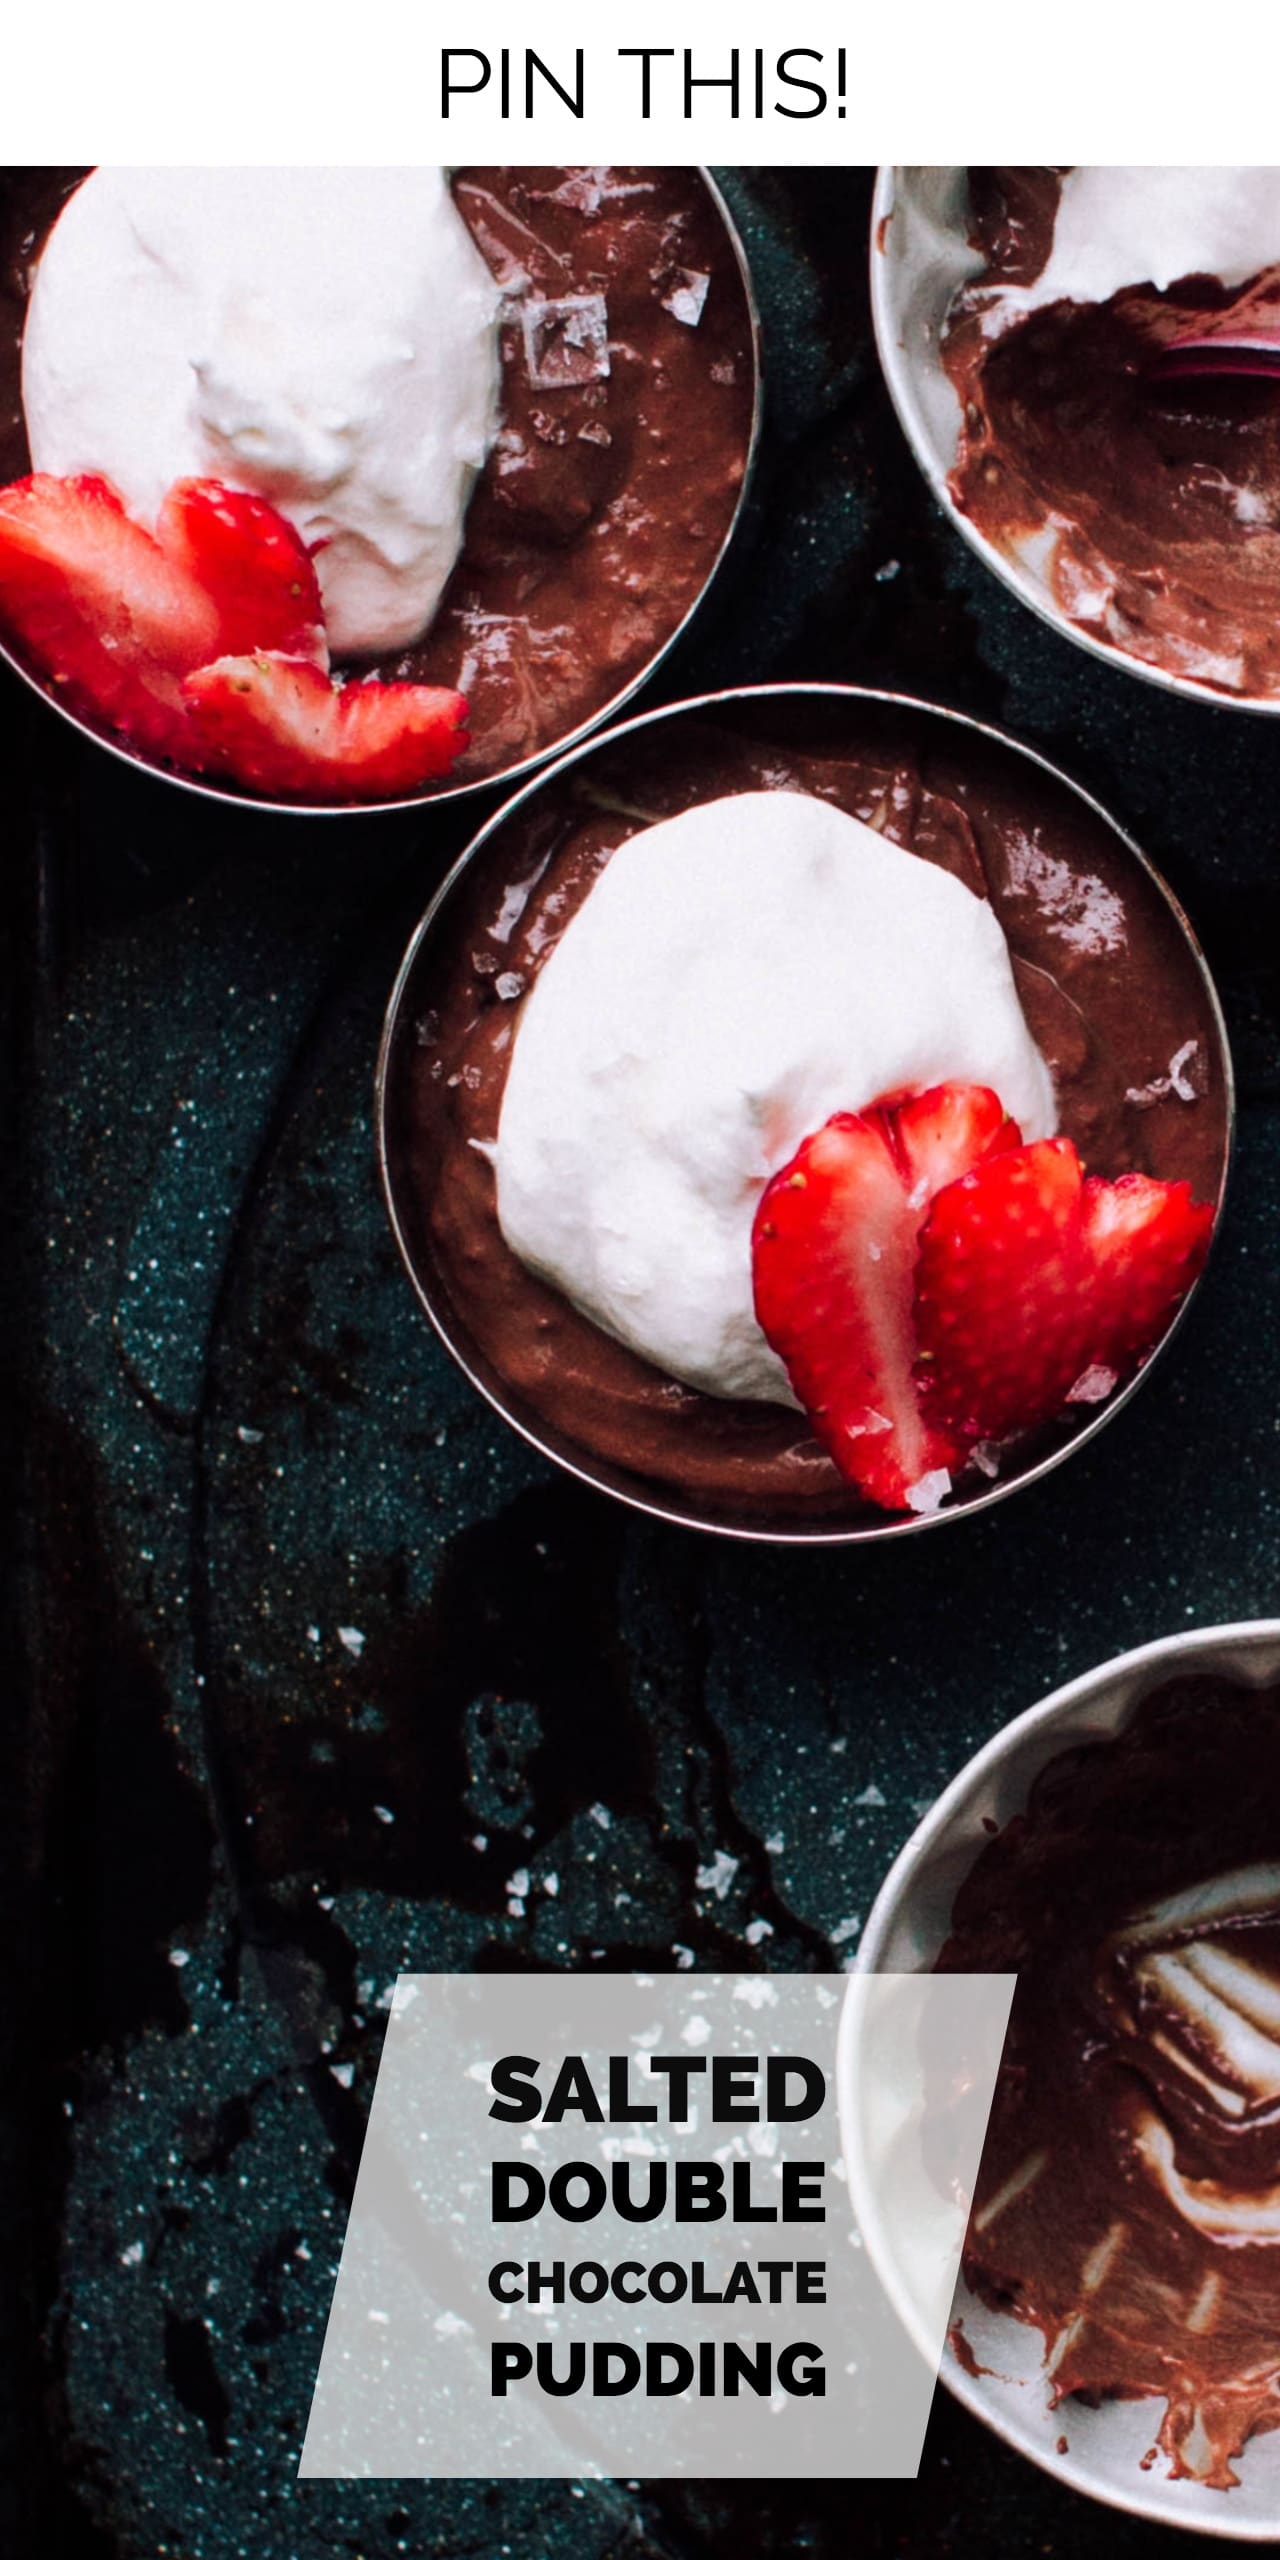 Salted Double Chocolate Pudding Recipe - Foodess.com